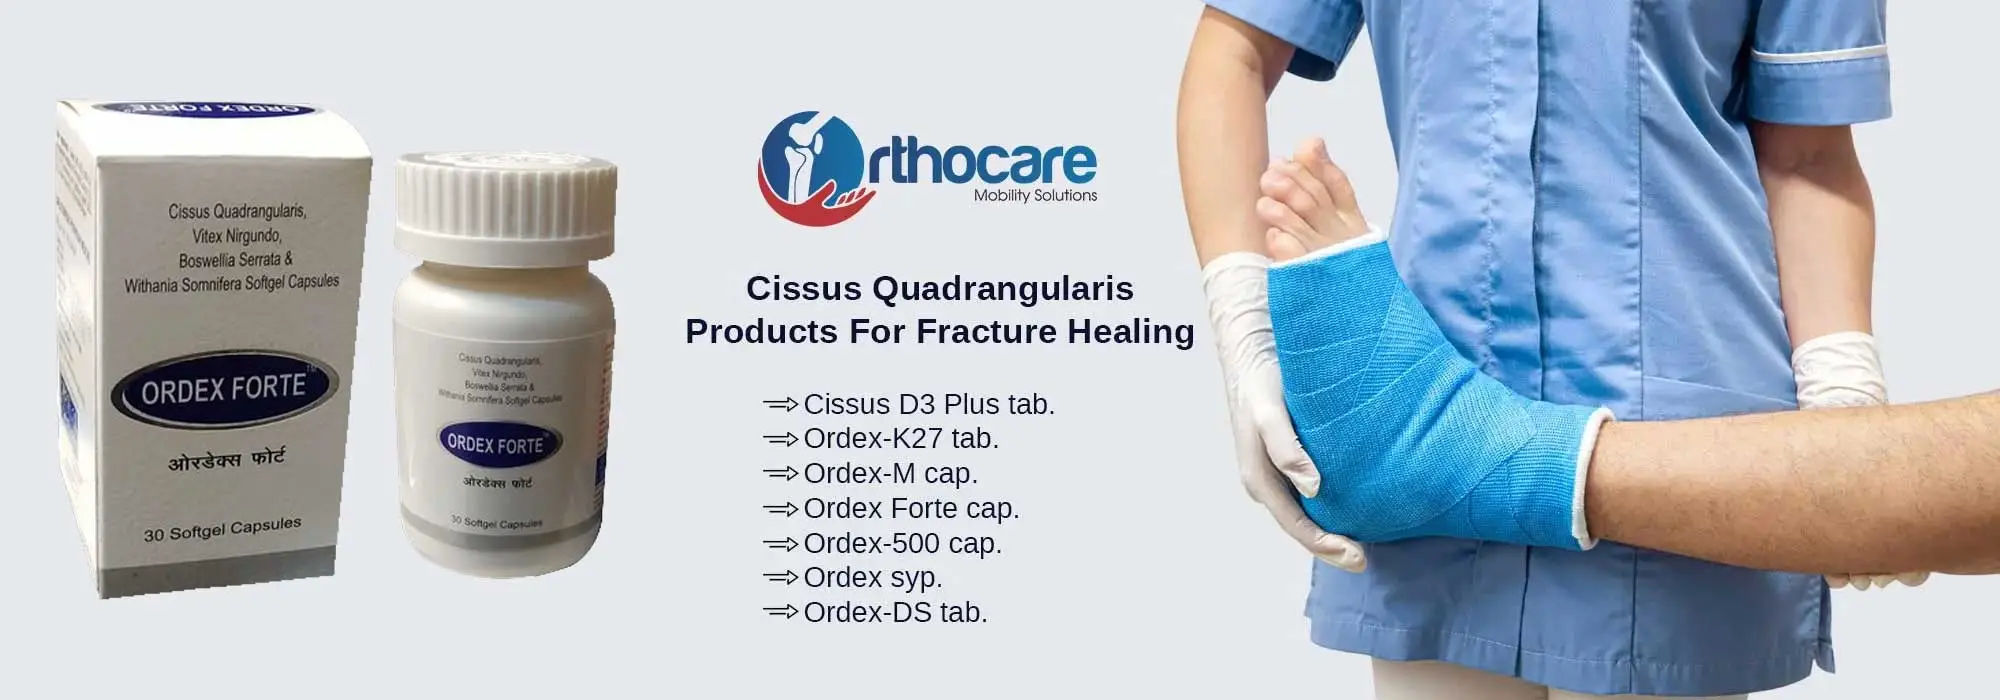 Cissus Quadrangularis Products For Fracture Healing Suppliers in South West Khasi Hills